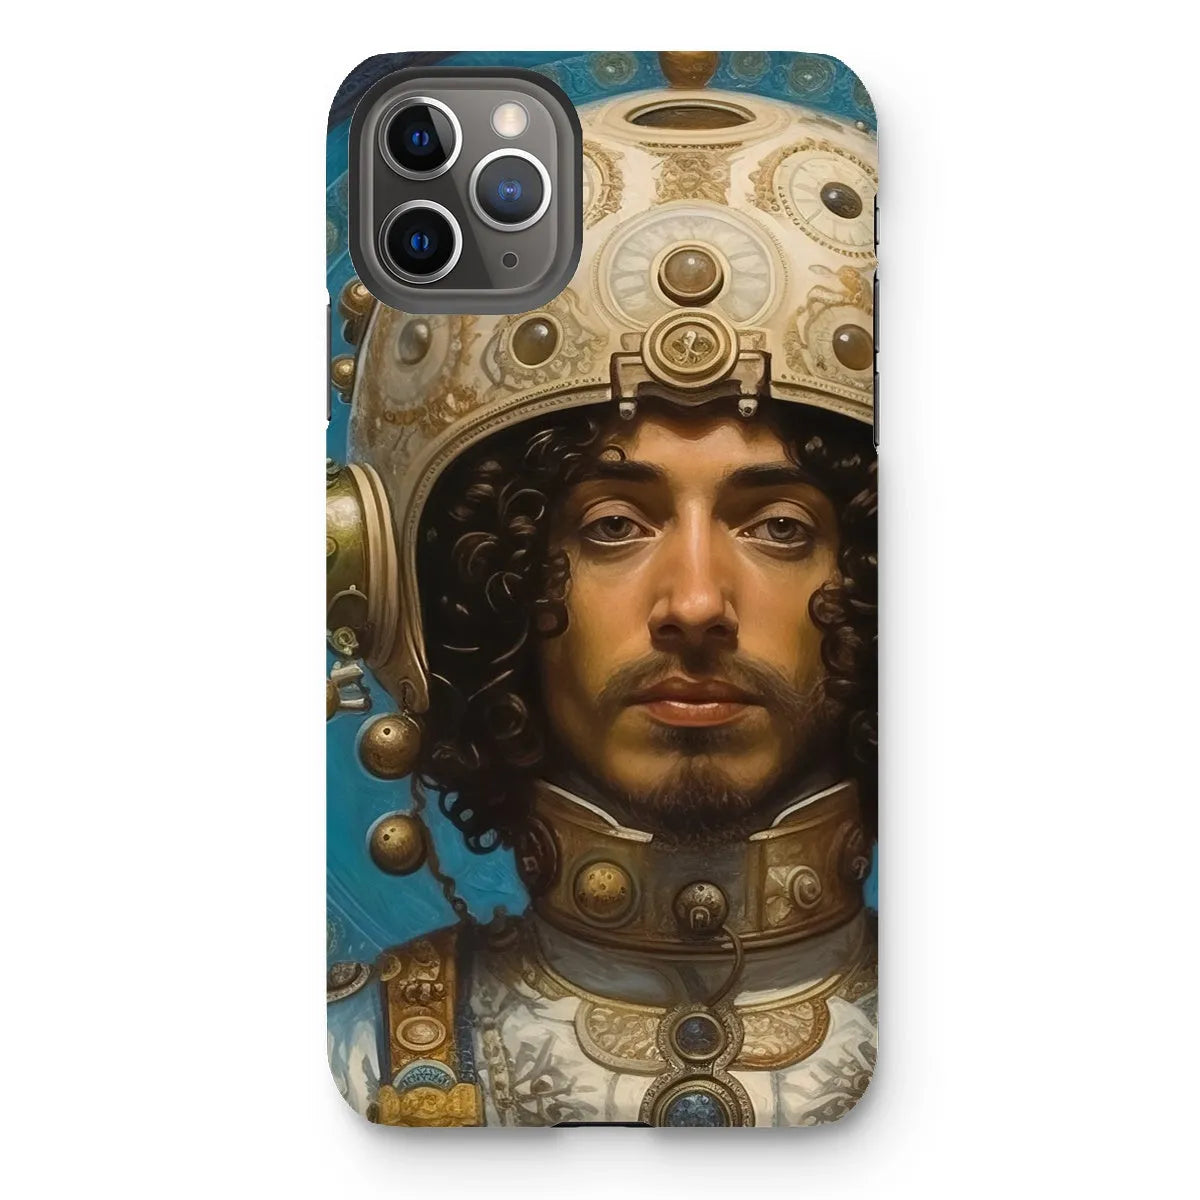 Mehdi The Gay Astronaut - Lgbtq Art Phone Case - Iphone 11 Pro Max / Matte - Mobile Phone Cases - Aesthetic Art